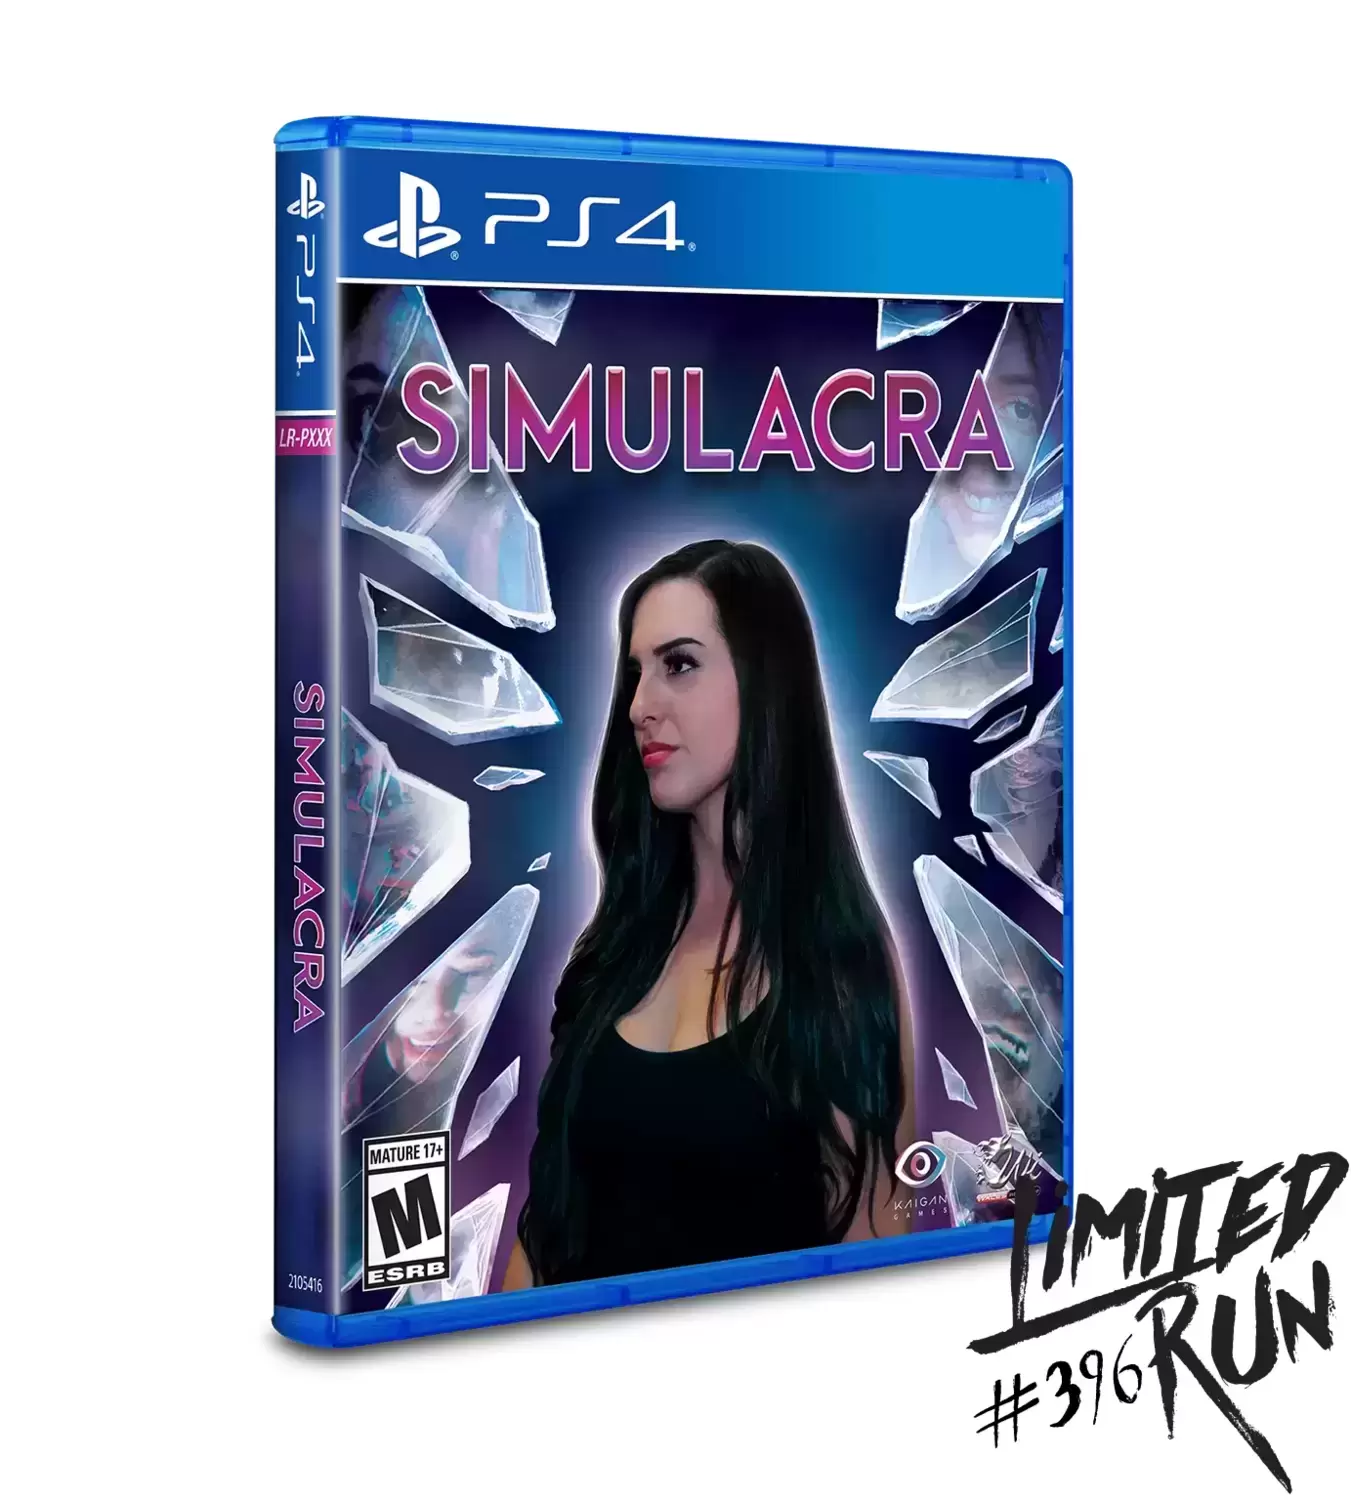 PS4 Games - Simulacra - Limited Run Games